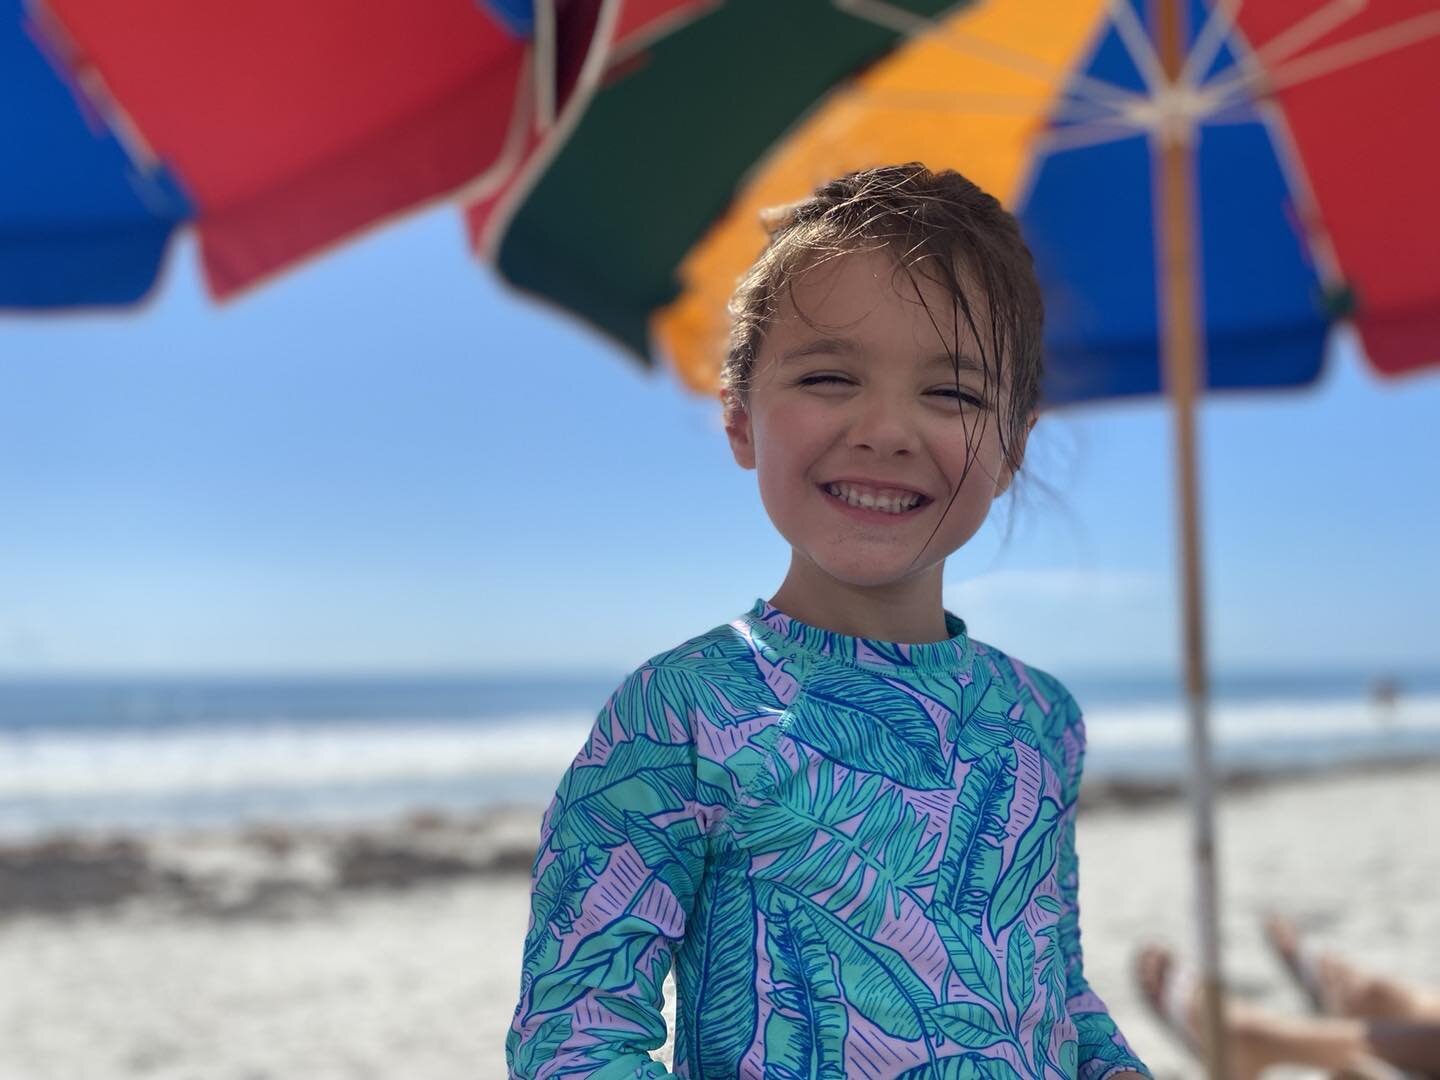 Beach time with our granddaughter Emilia ❤️🐝So happy and blessed to have time with our kids!